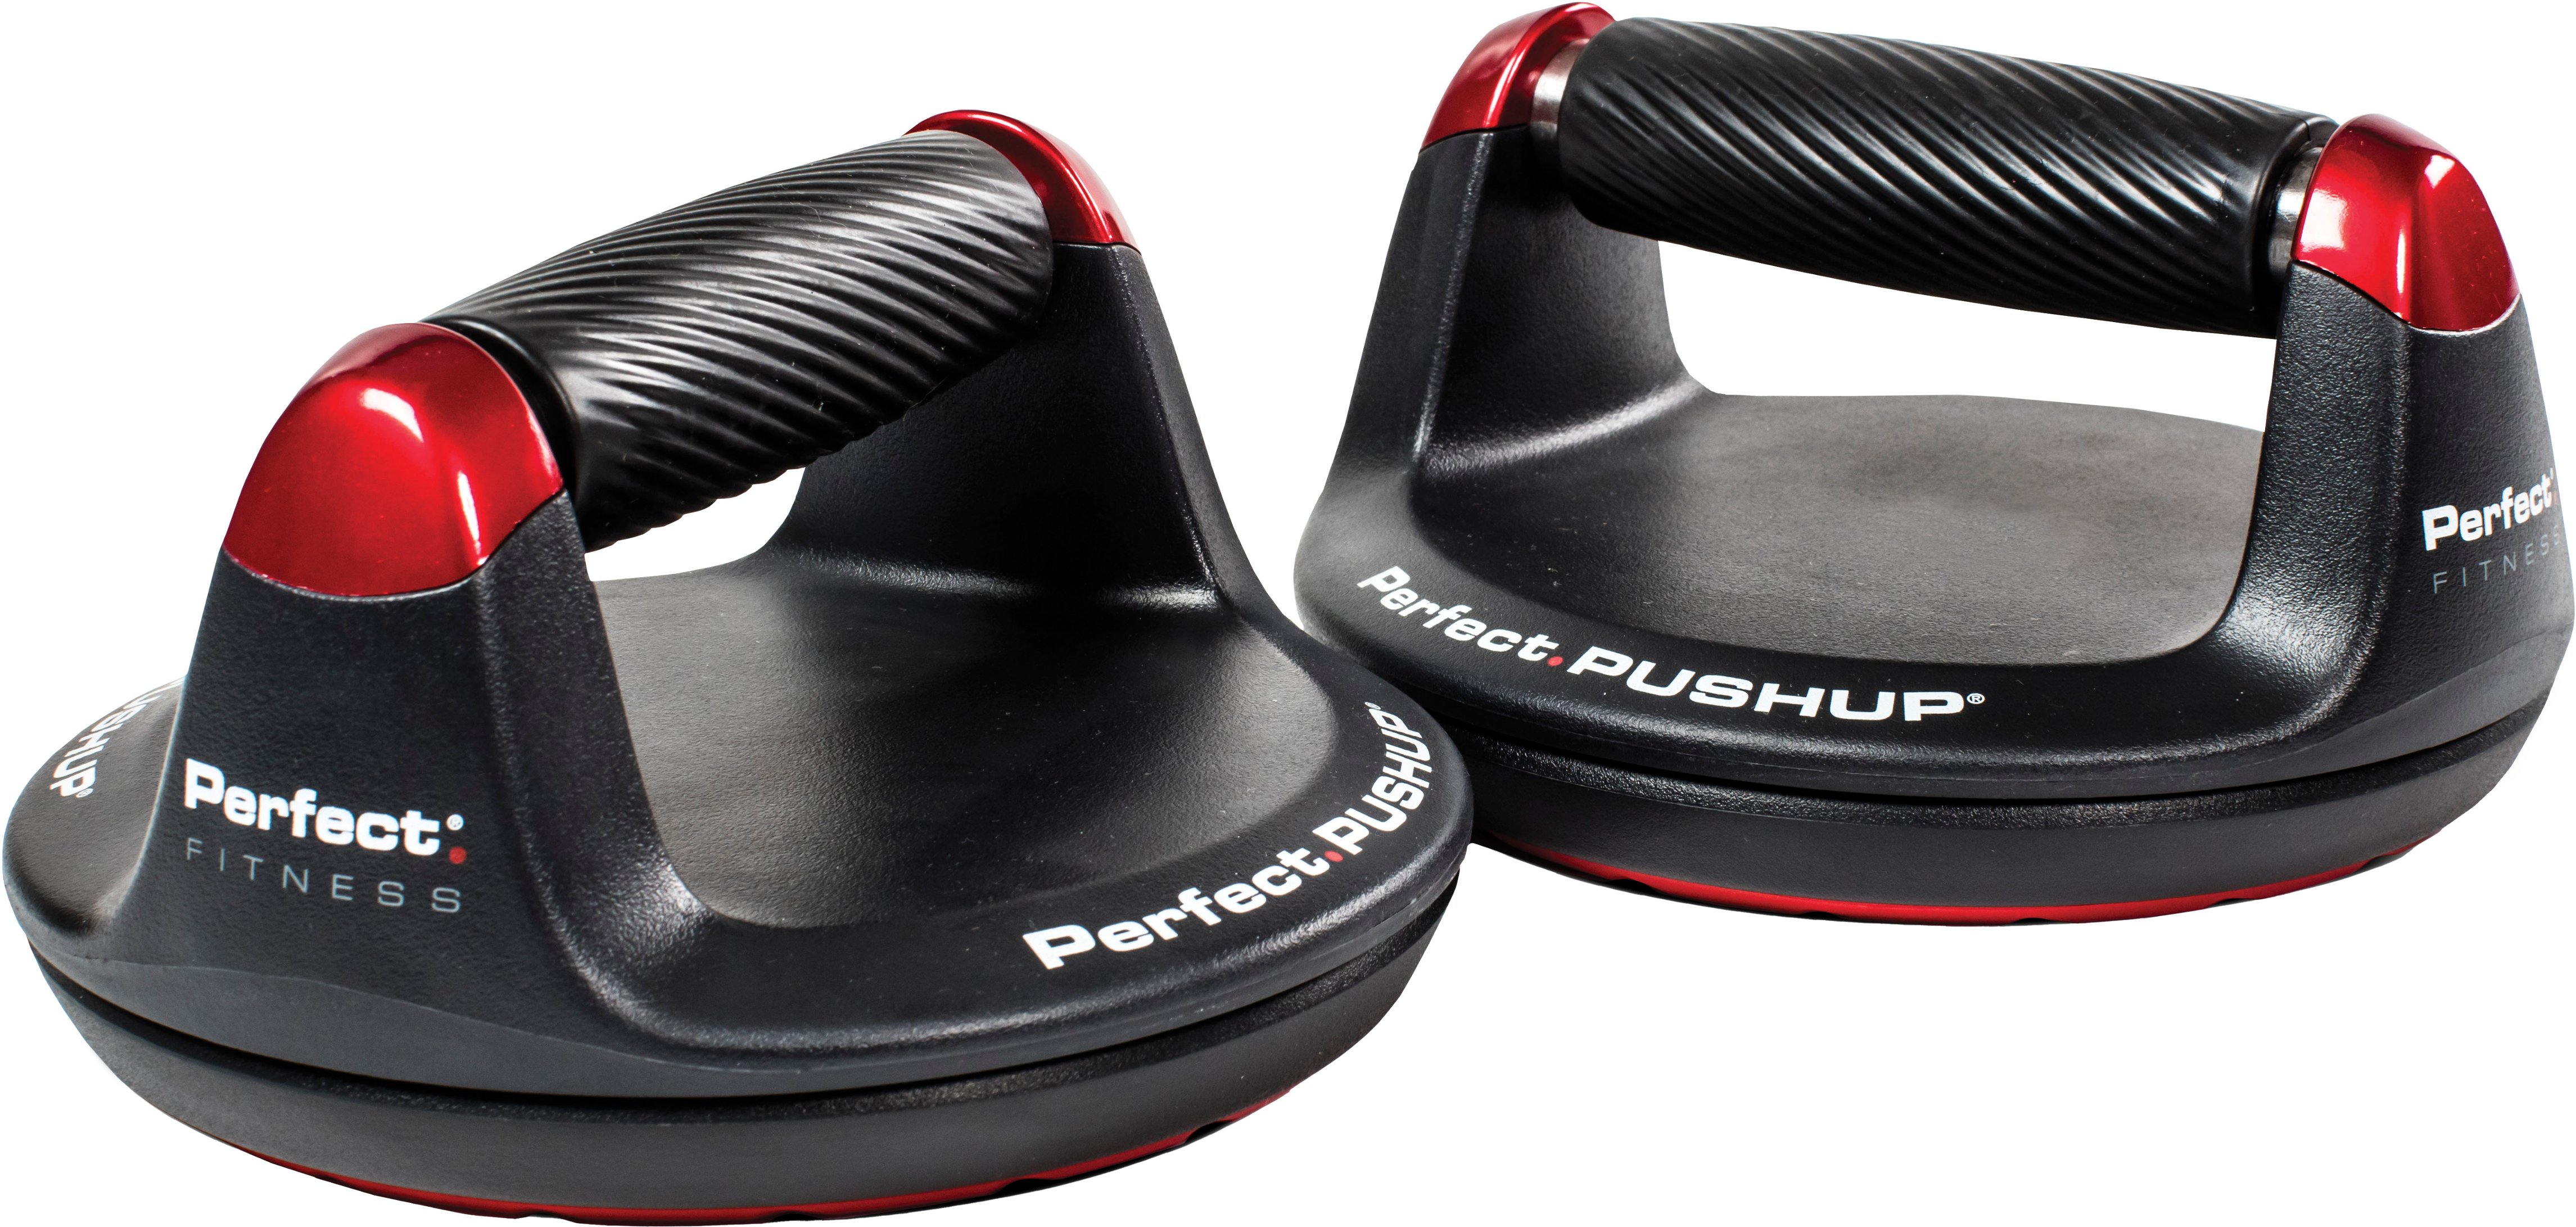 Perfect Fitness Perfect Pushup Elite Black 31001 - Best Buy